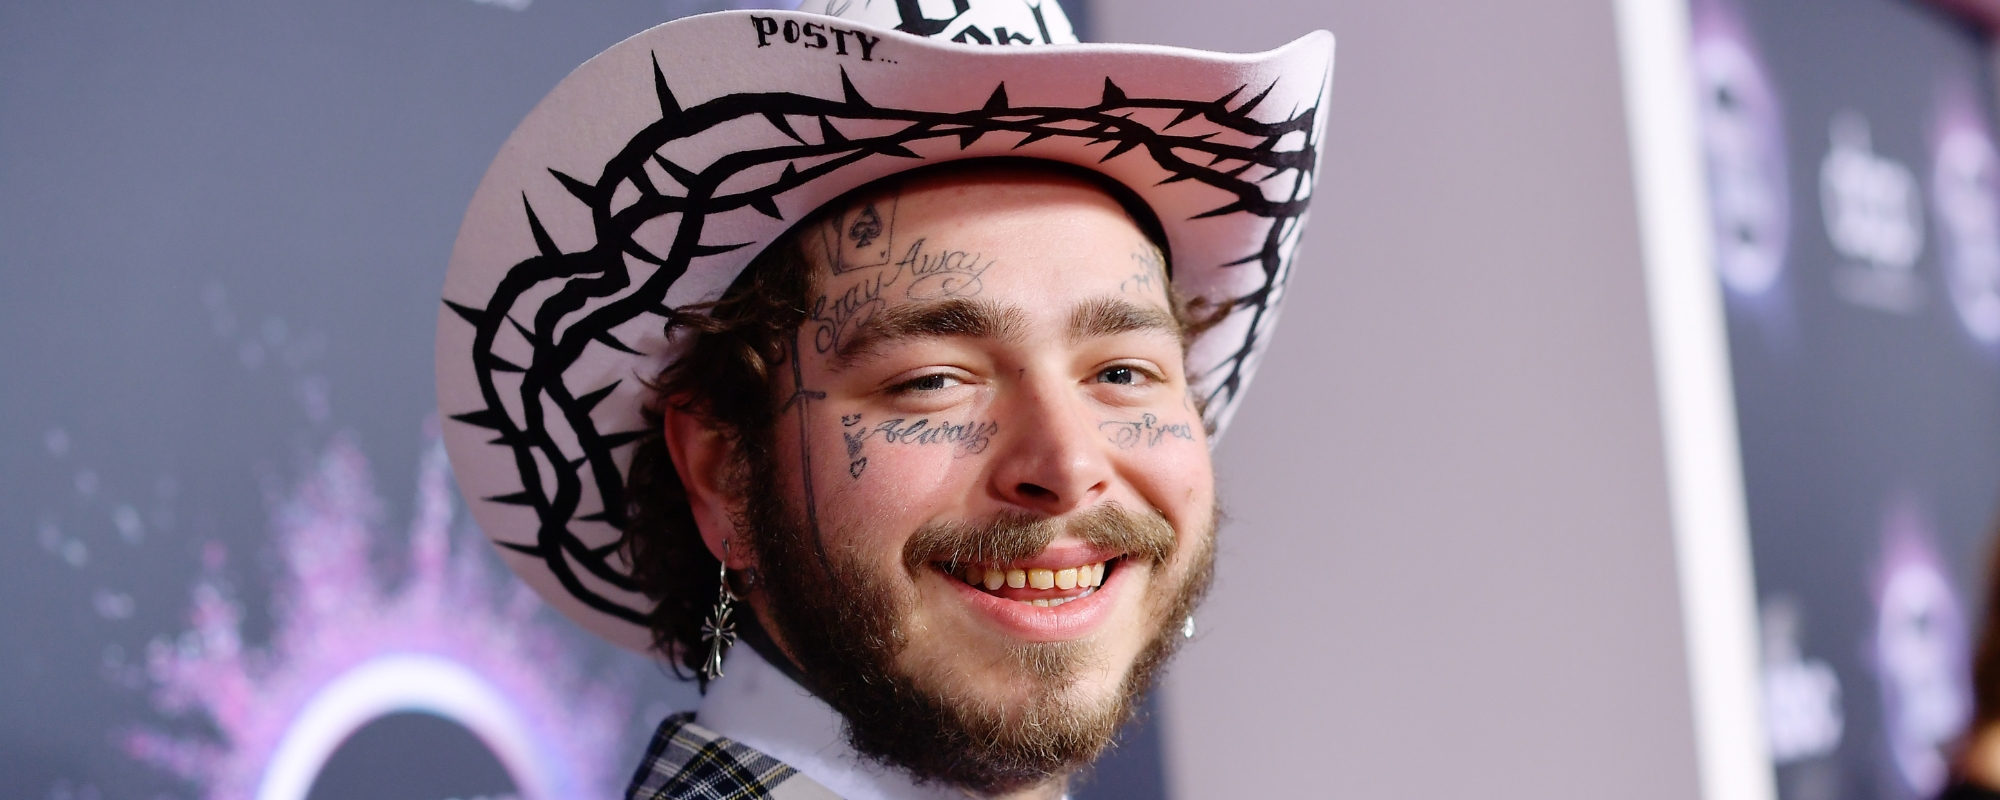 Post Malone Hits Red Hot Chili Peppers Drummer Chad Smith with Hilarious ‘Step Brothers’ Reference in TikTok Clip